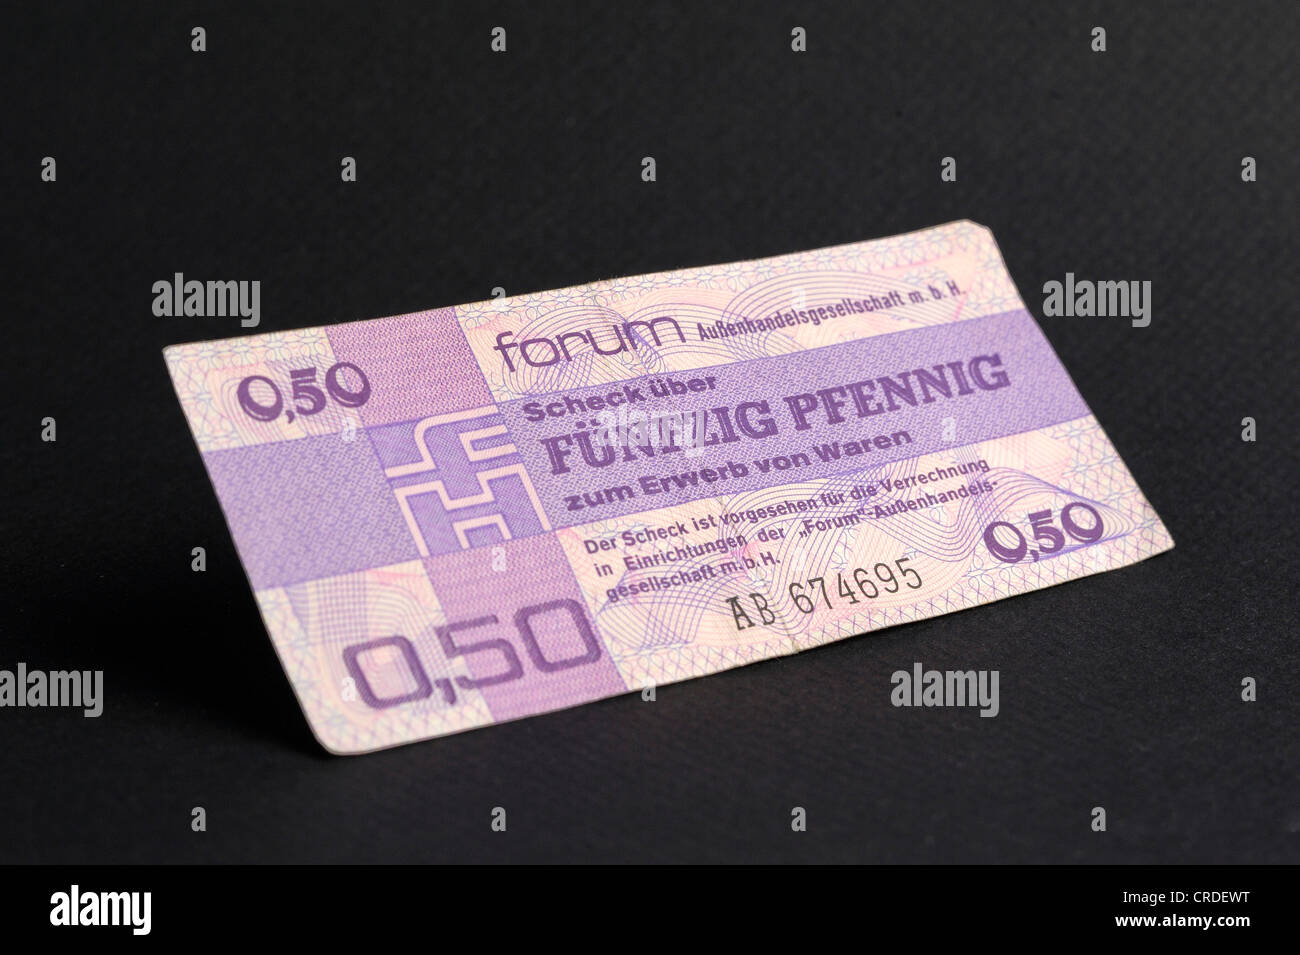 Cheque from Forum for 50 pfennig for cashless payments for Western goods in the East German Intershop, GDR, 1979 Stock Photo